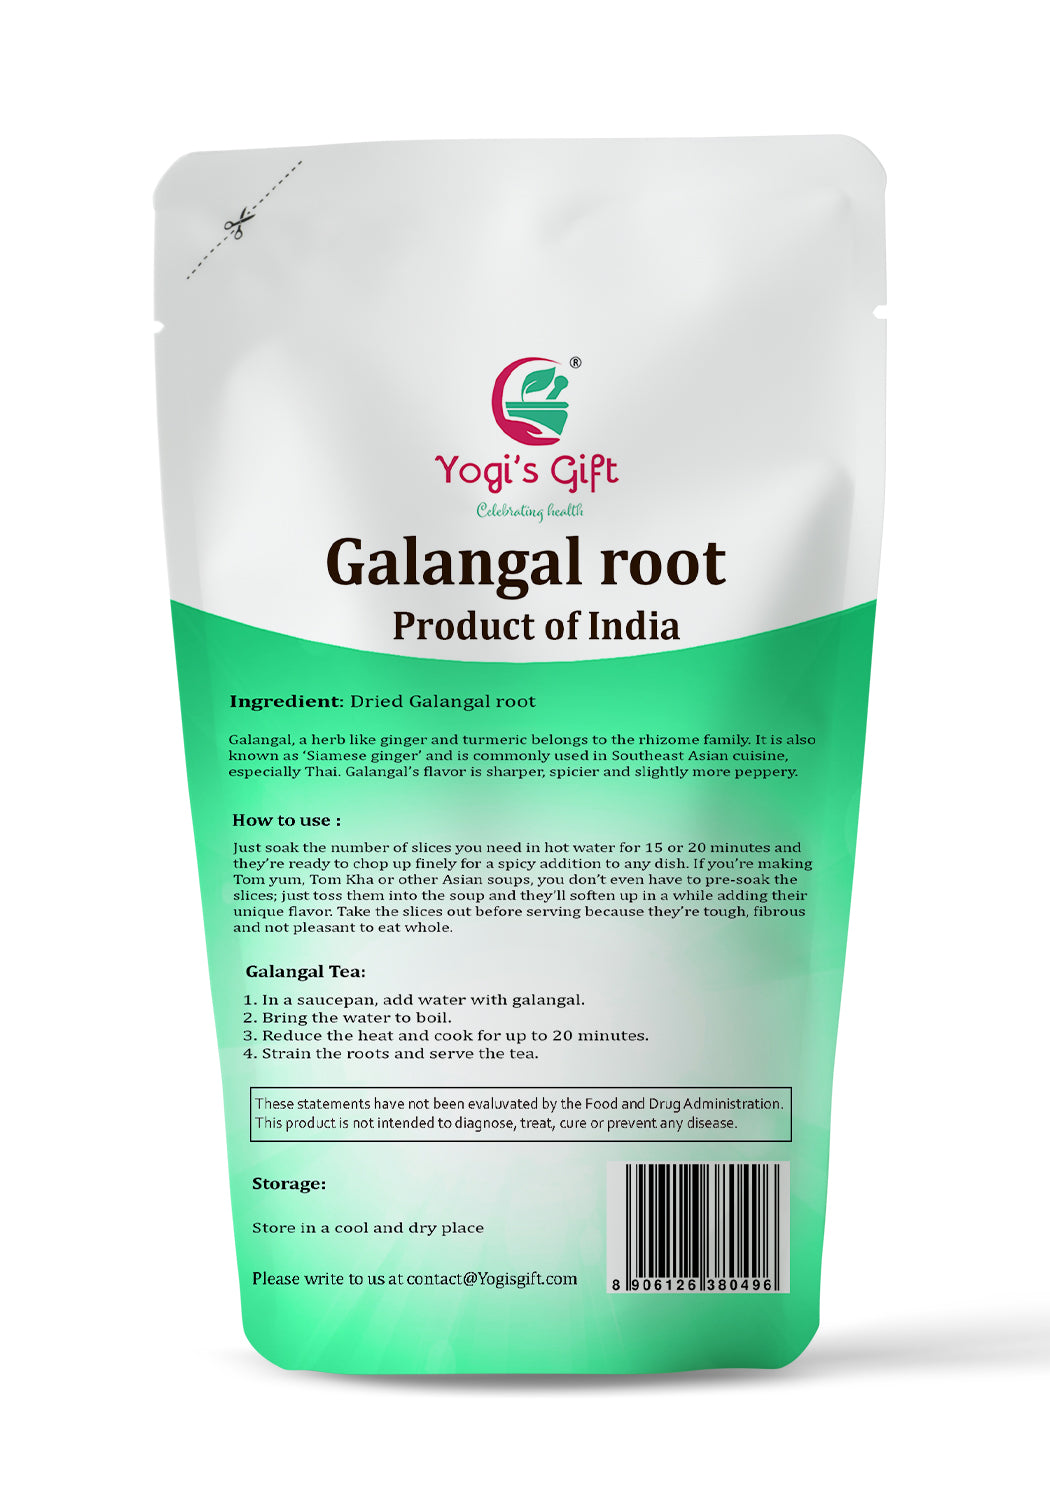 Dried Galangal Root 1LB | Whole Root | Alpinia Galangal | Ads Wonderful Flavour And Aroma To Soups |  Yogi's Gift®